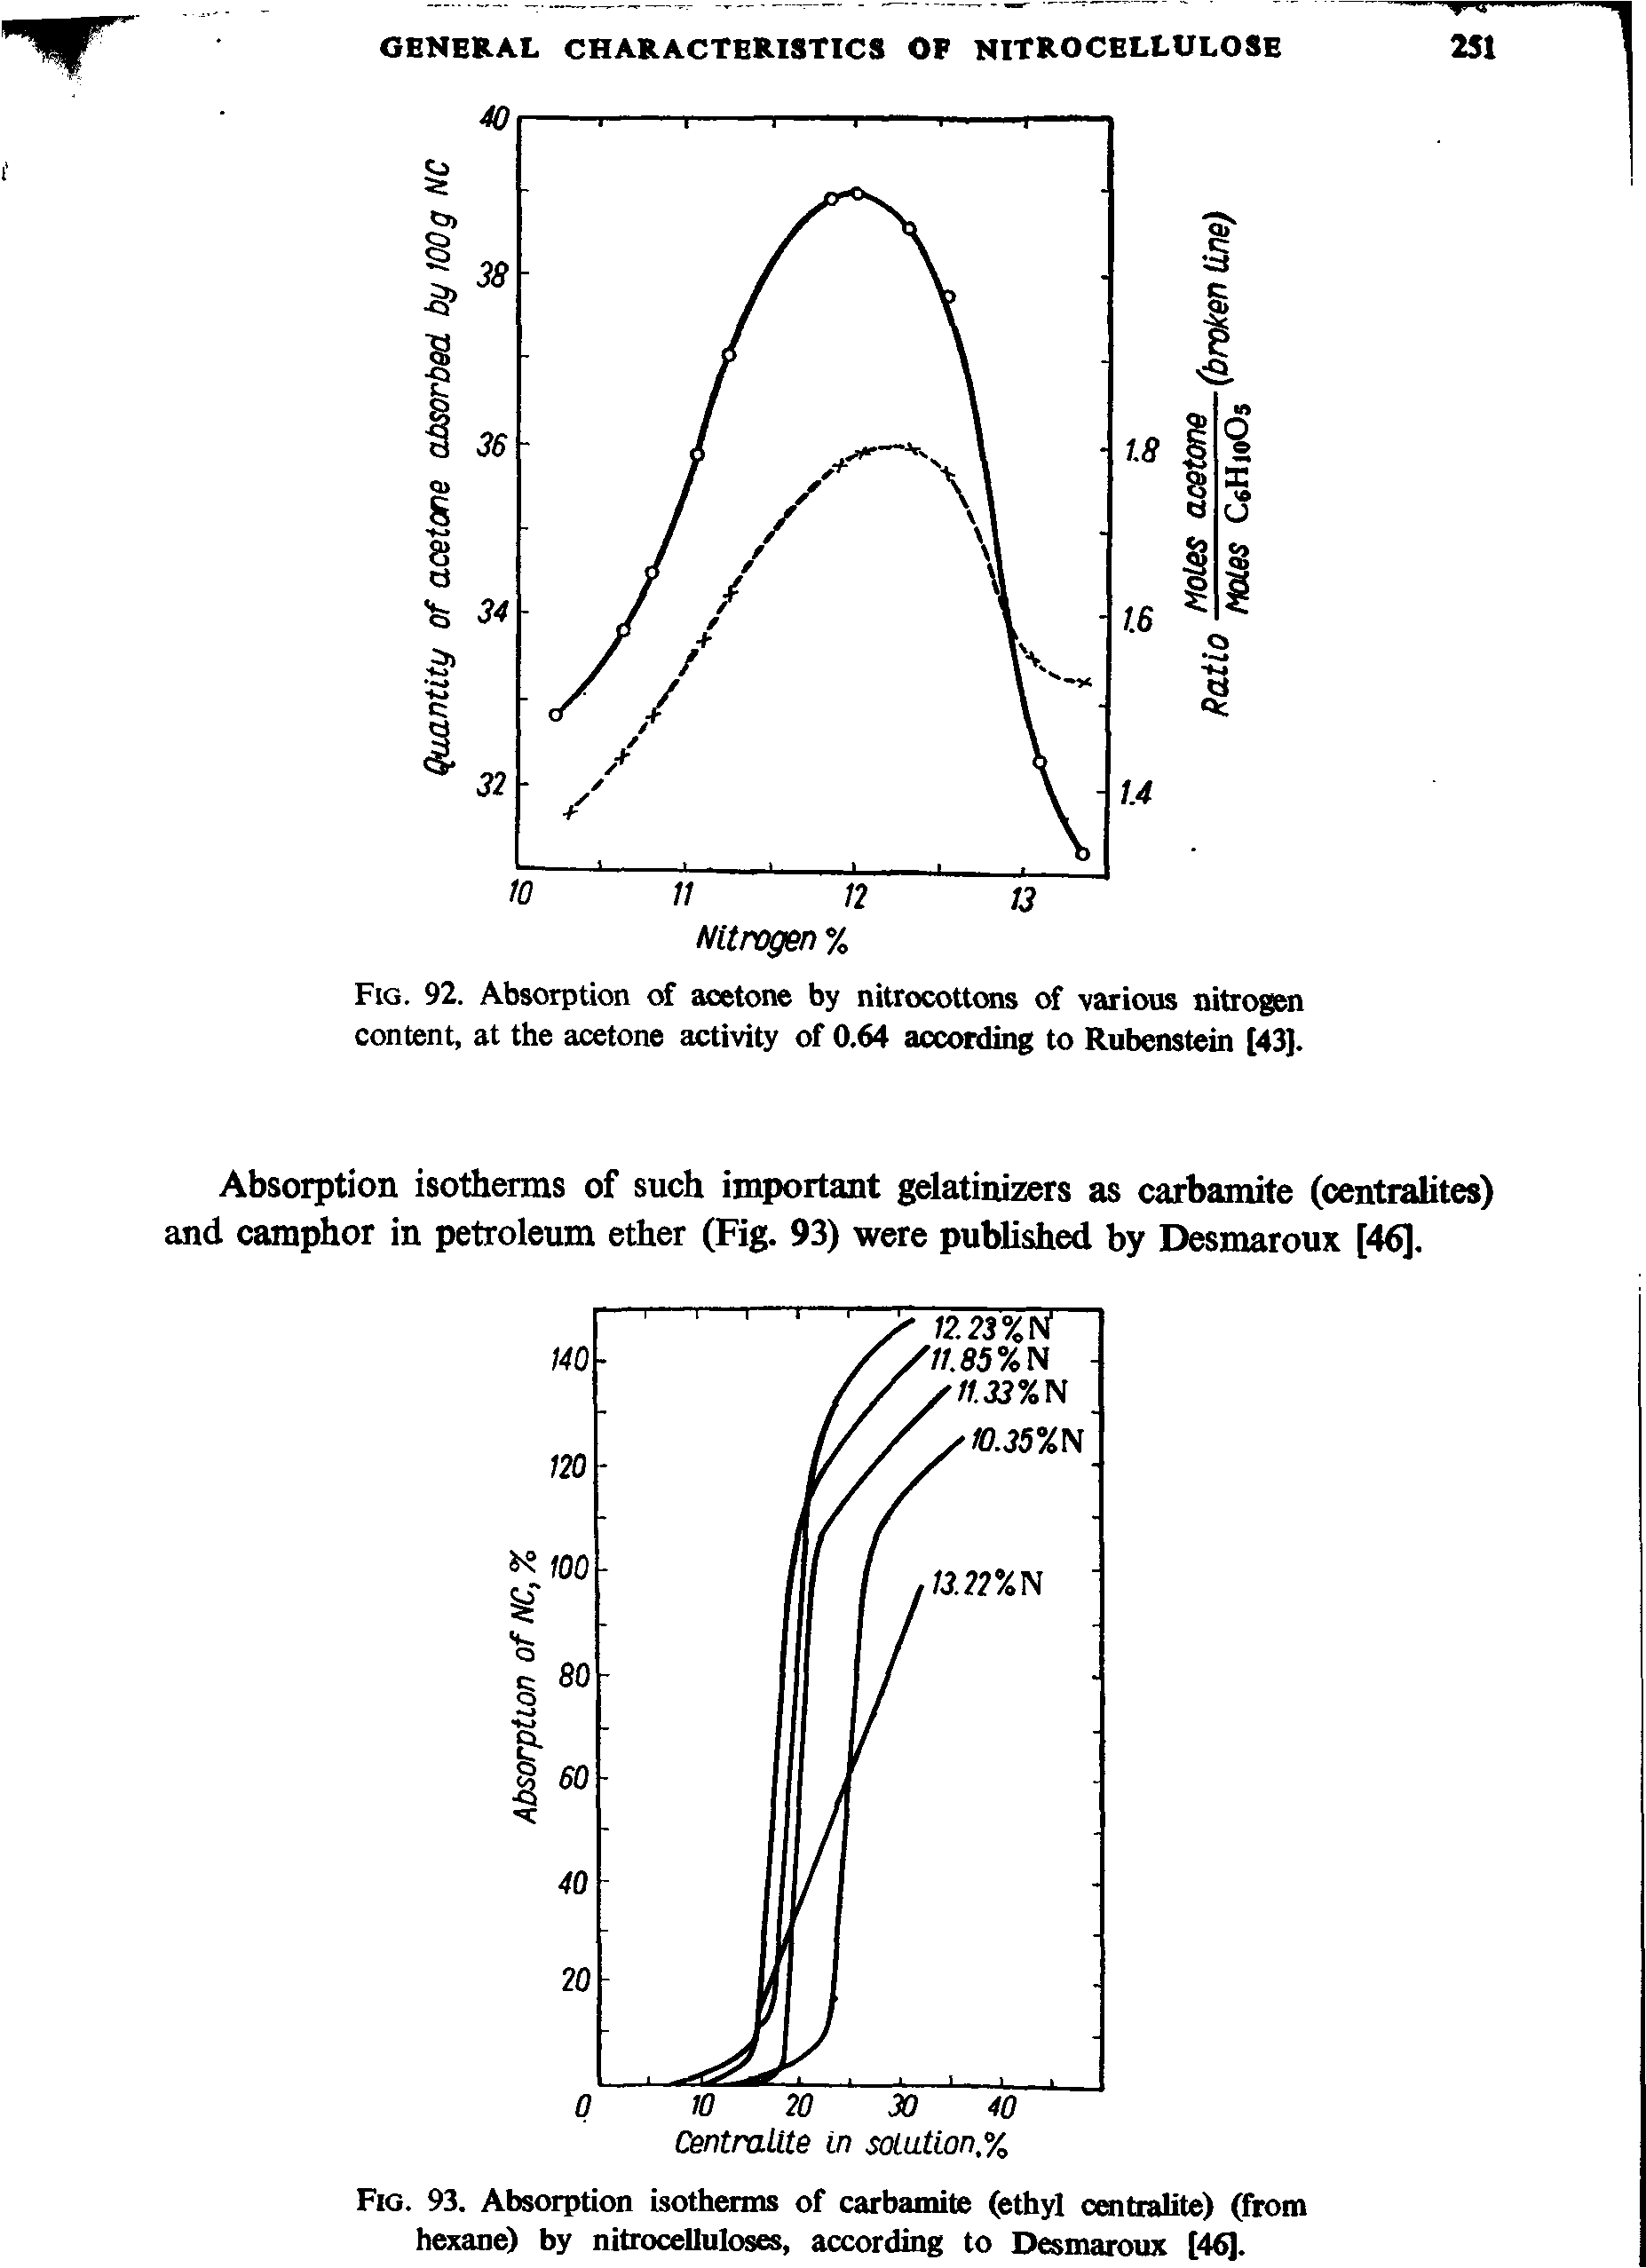 Fig. 92. Absorption of acetone by nitrocottons of various nitrogen content, at the acetone activity of 0.64 according to Rubenstein [43].